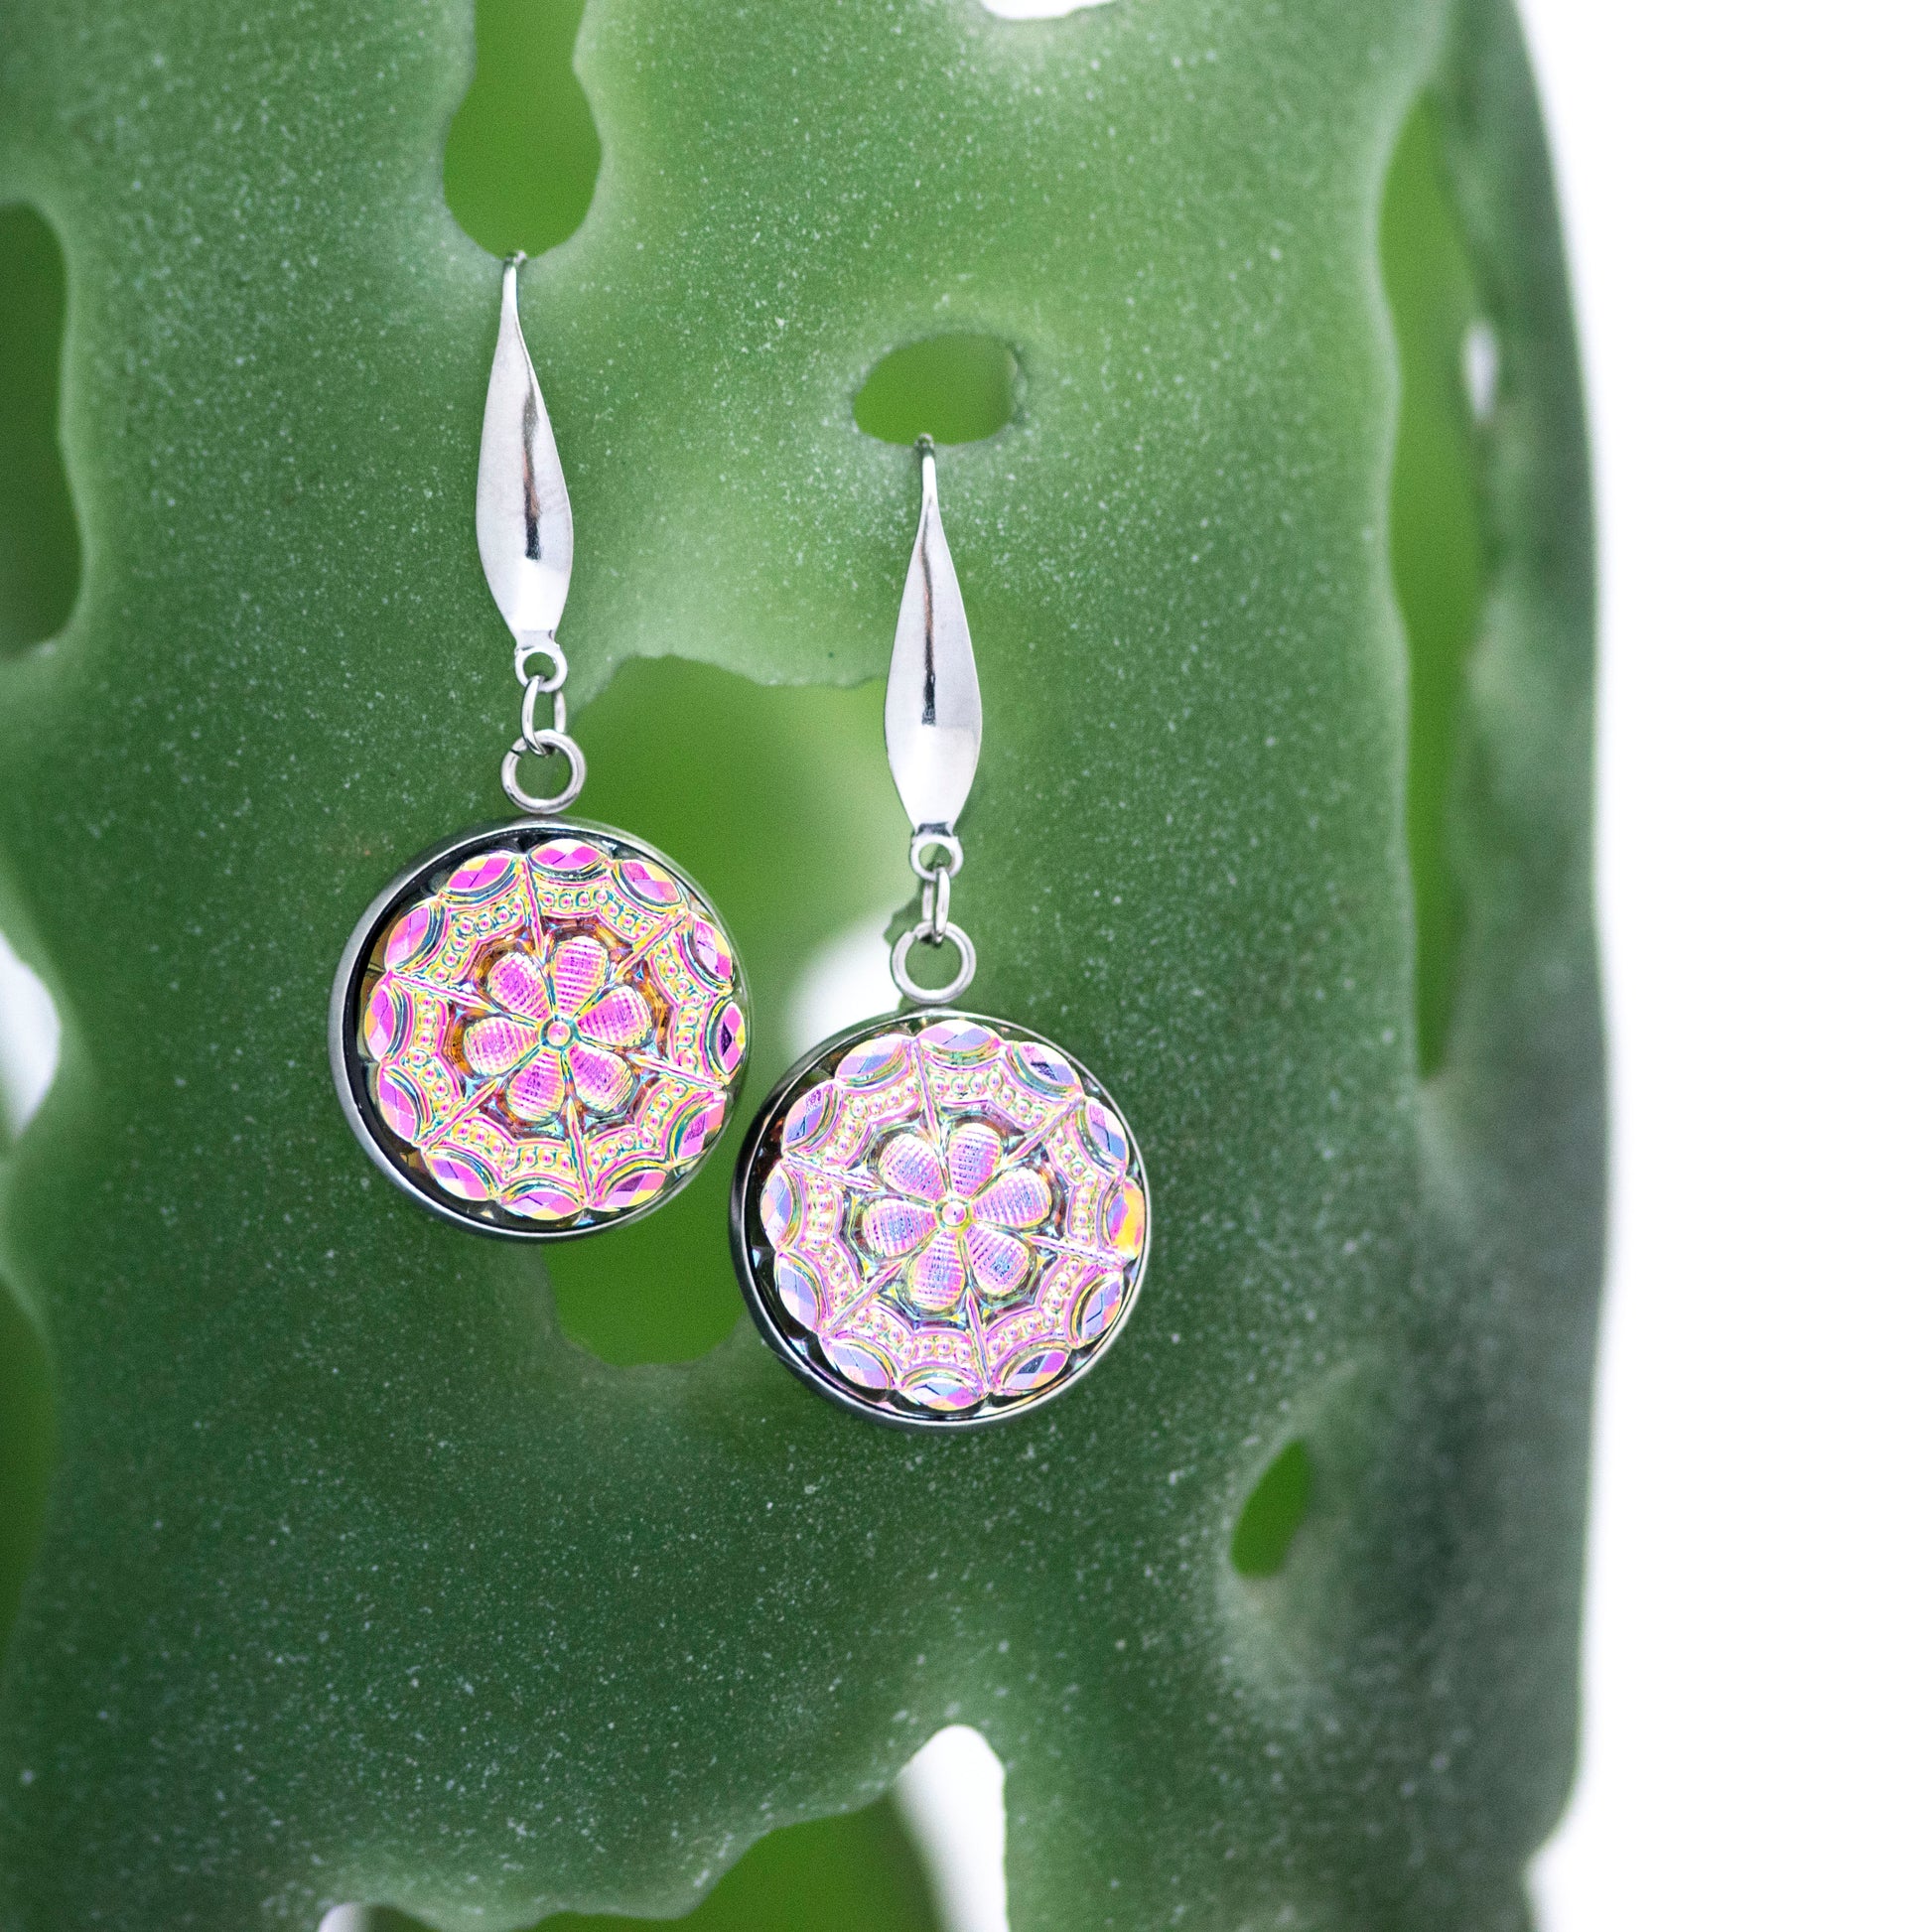 Flashy iridescent pink and green Czech glass buttons in antique relief. Dangle earrings.